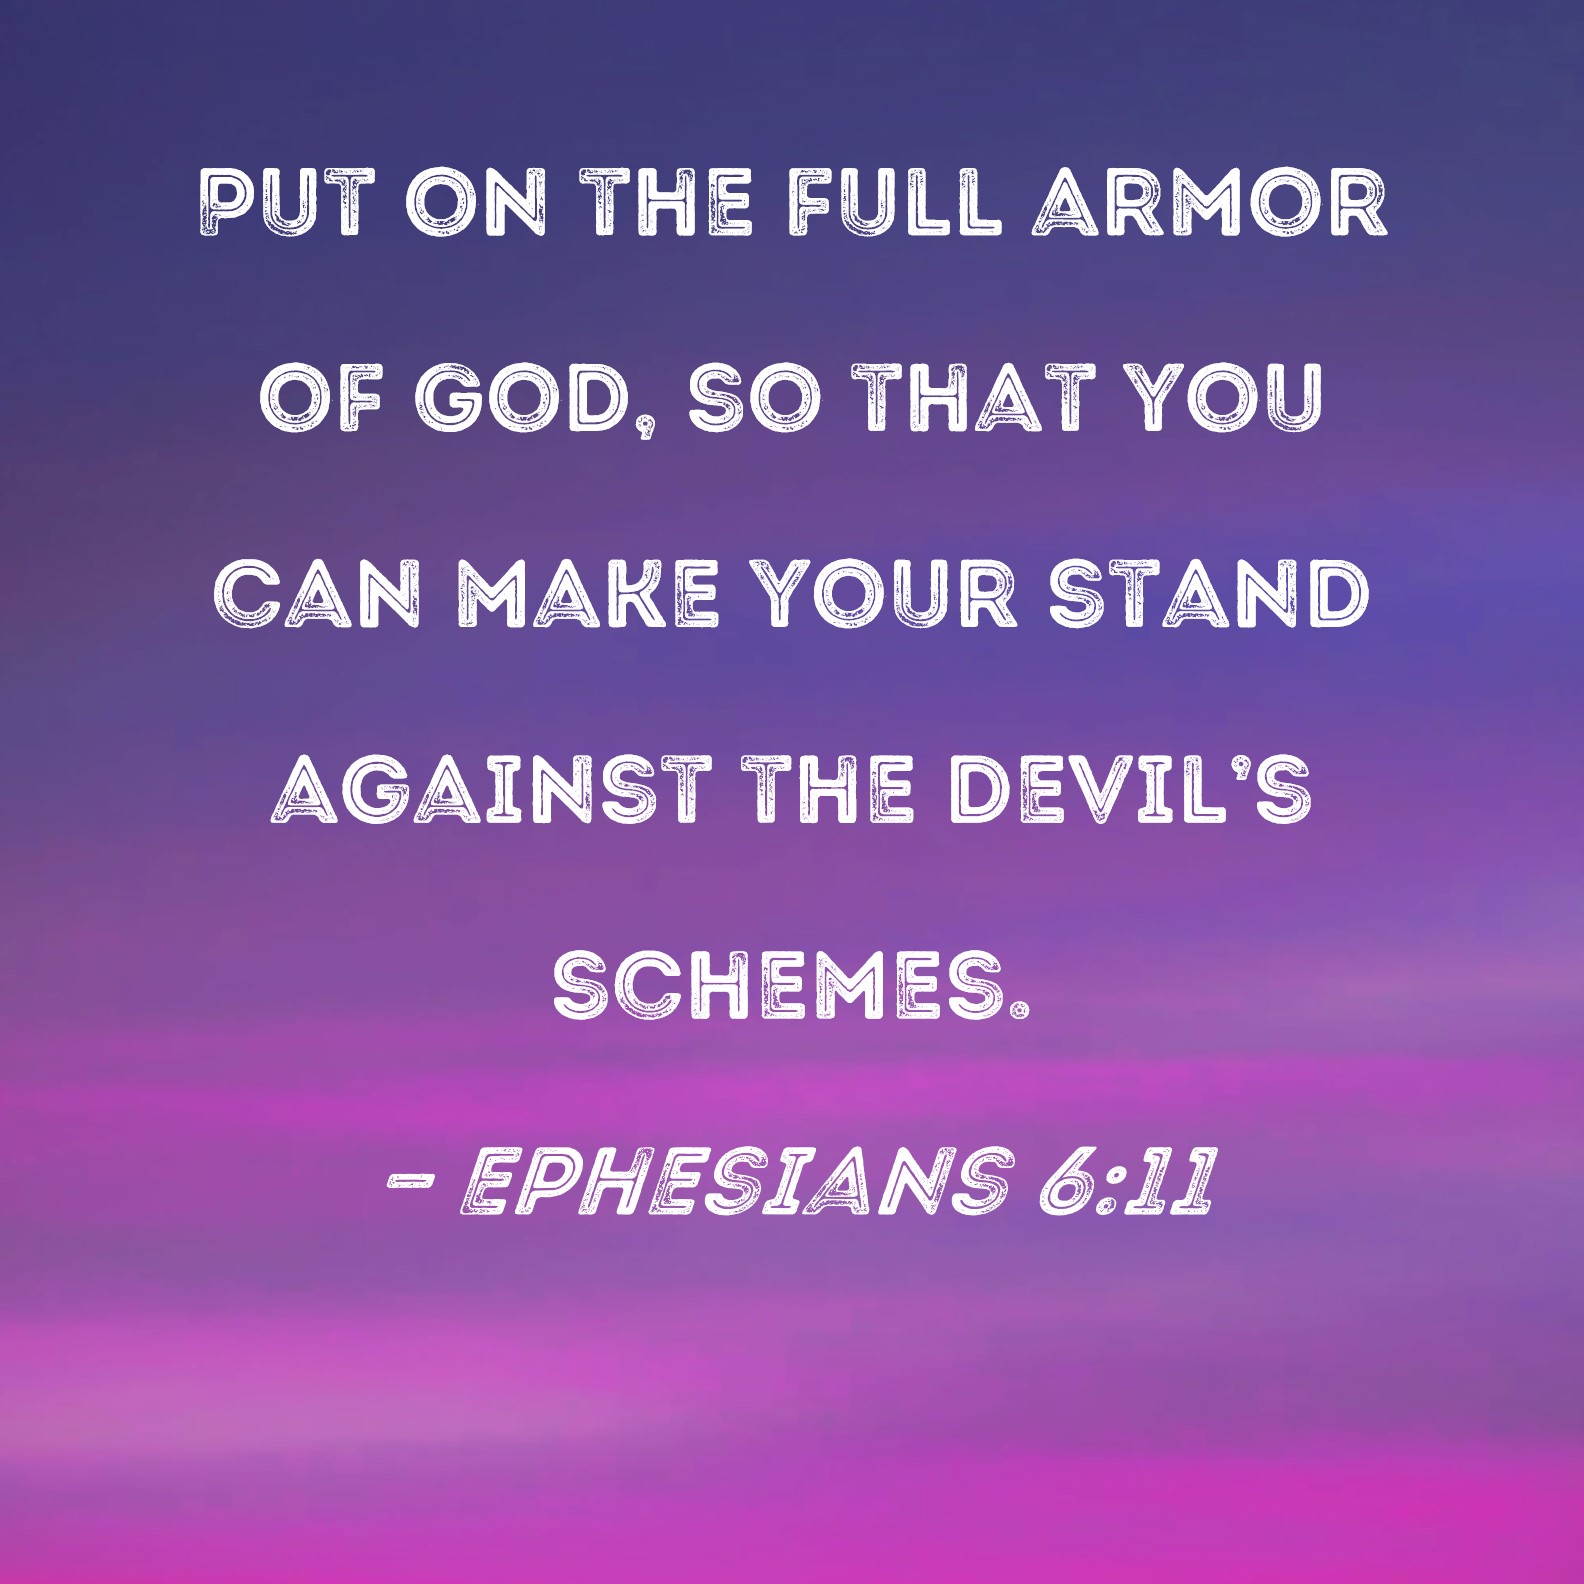 ephesians-6-11-put-on-the-full-armor-of-god-so-that-you-can-make-your